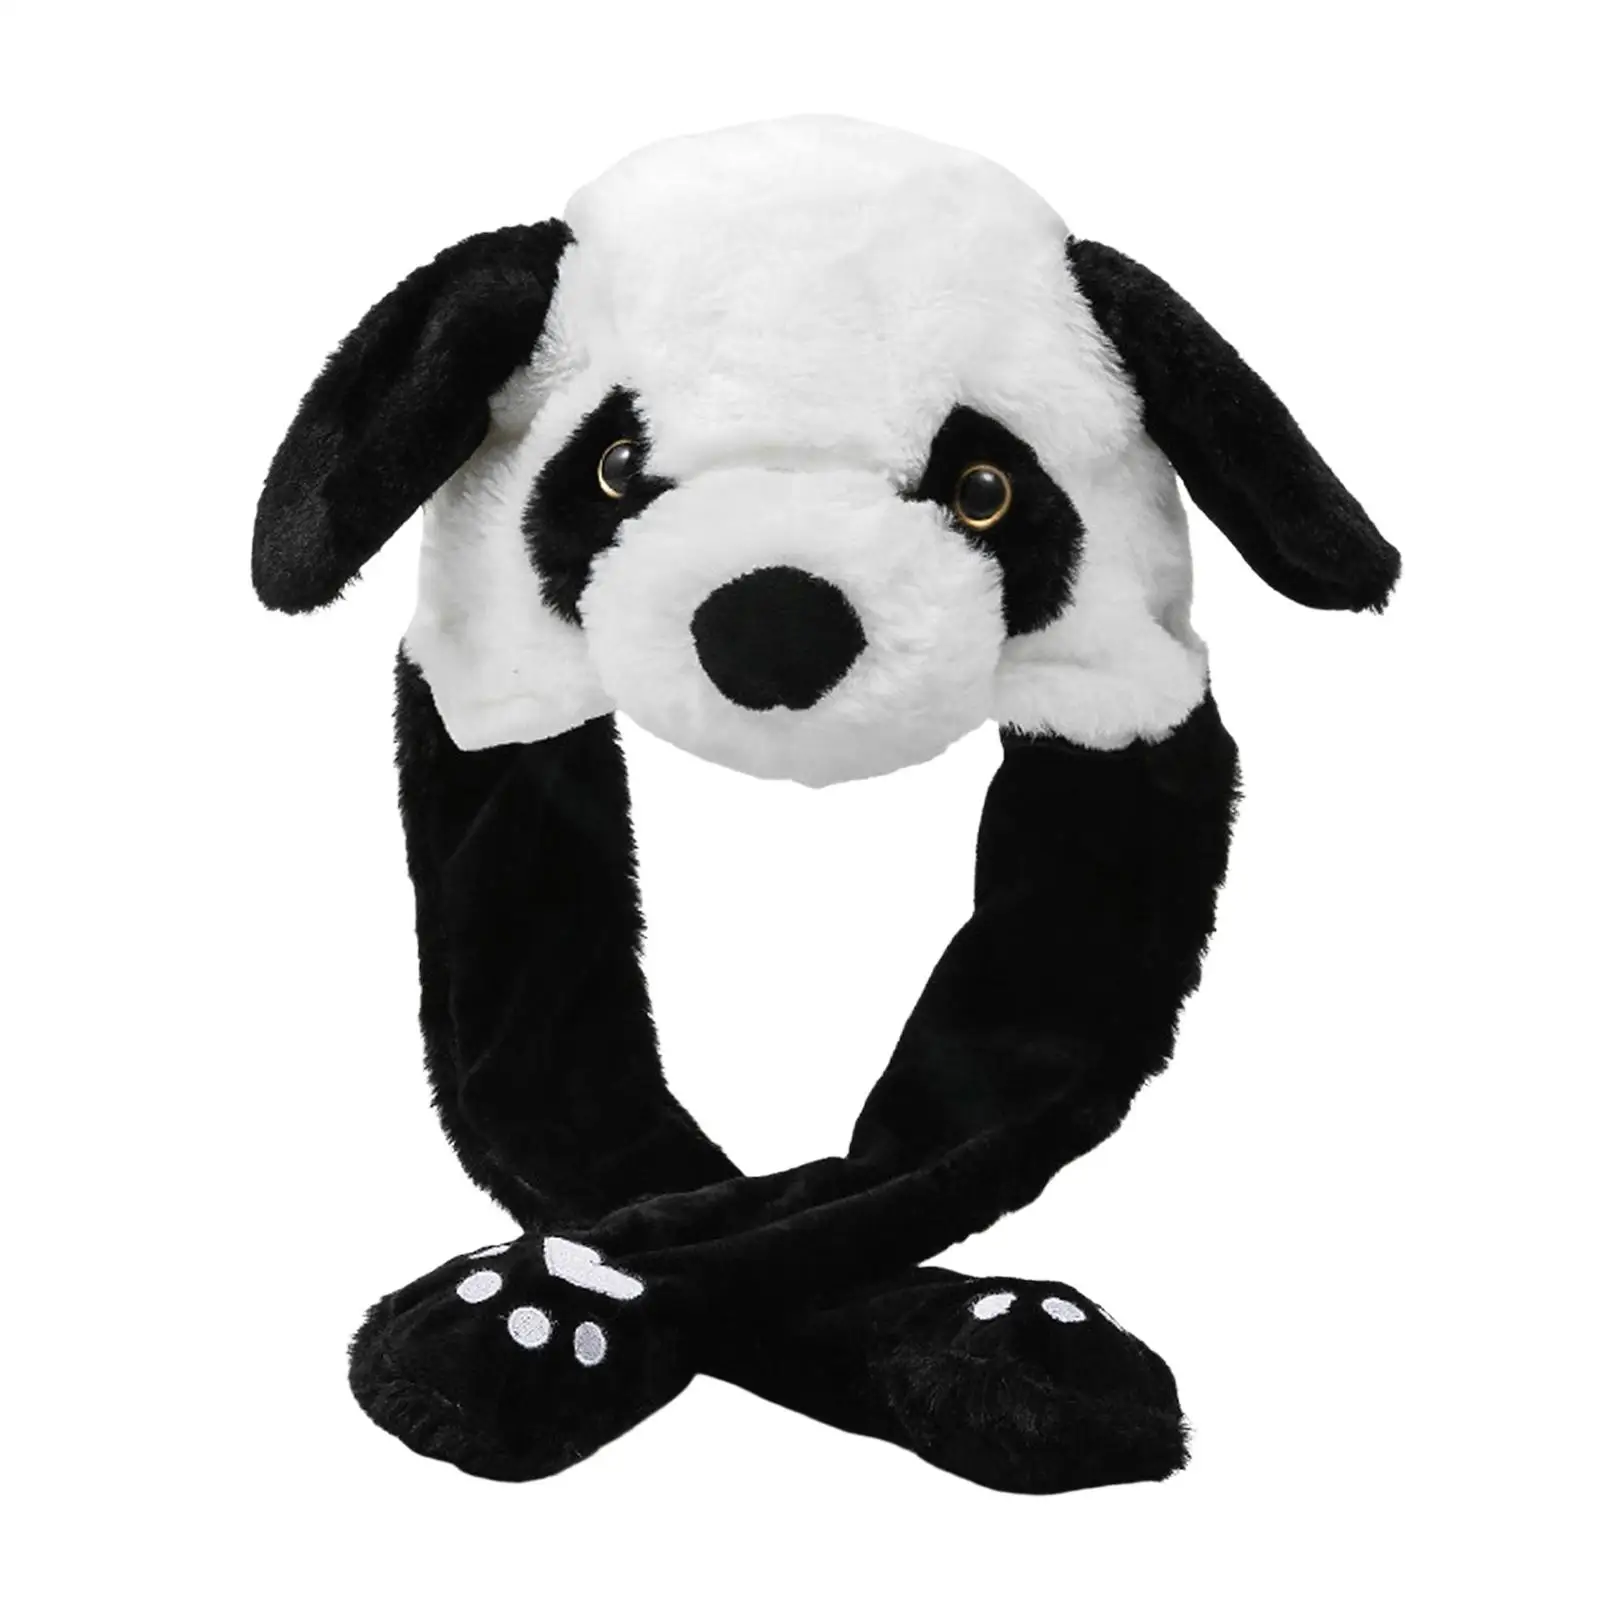 Cute Ear Moving Jumping Hats Decoration Photo Props Cozy Holiday Hat Headdress Panda Plush Hat for Party Easter Costume Cosplay